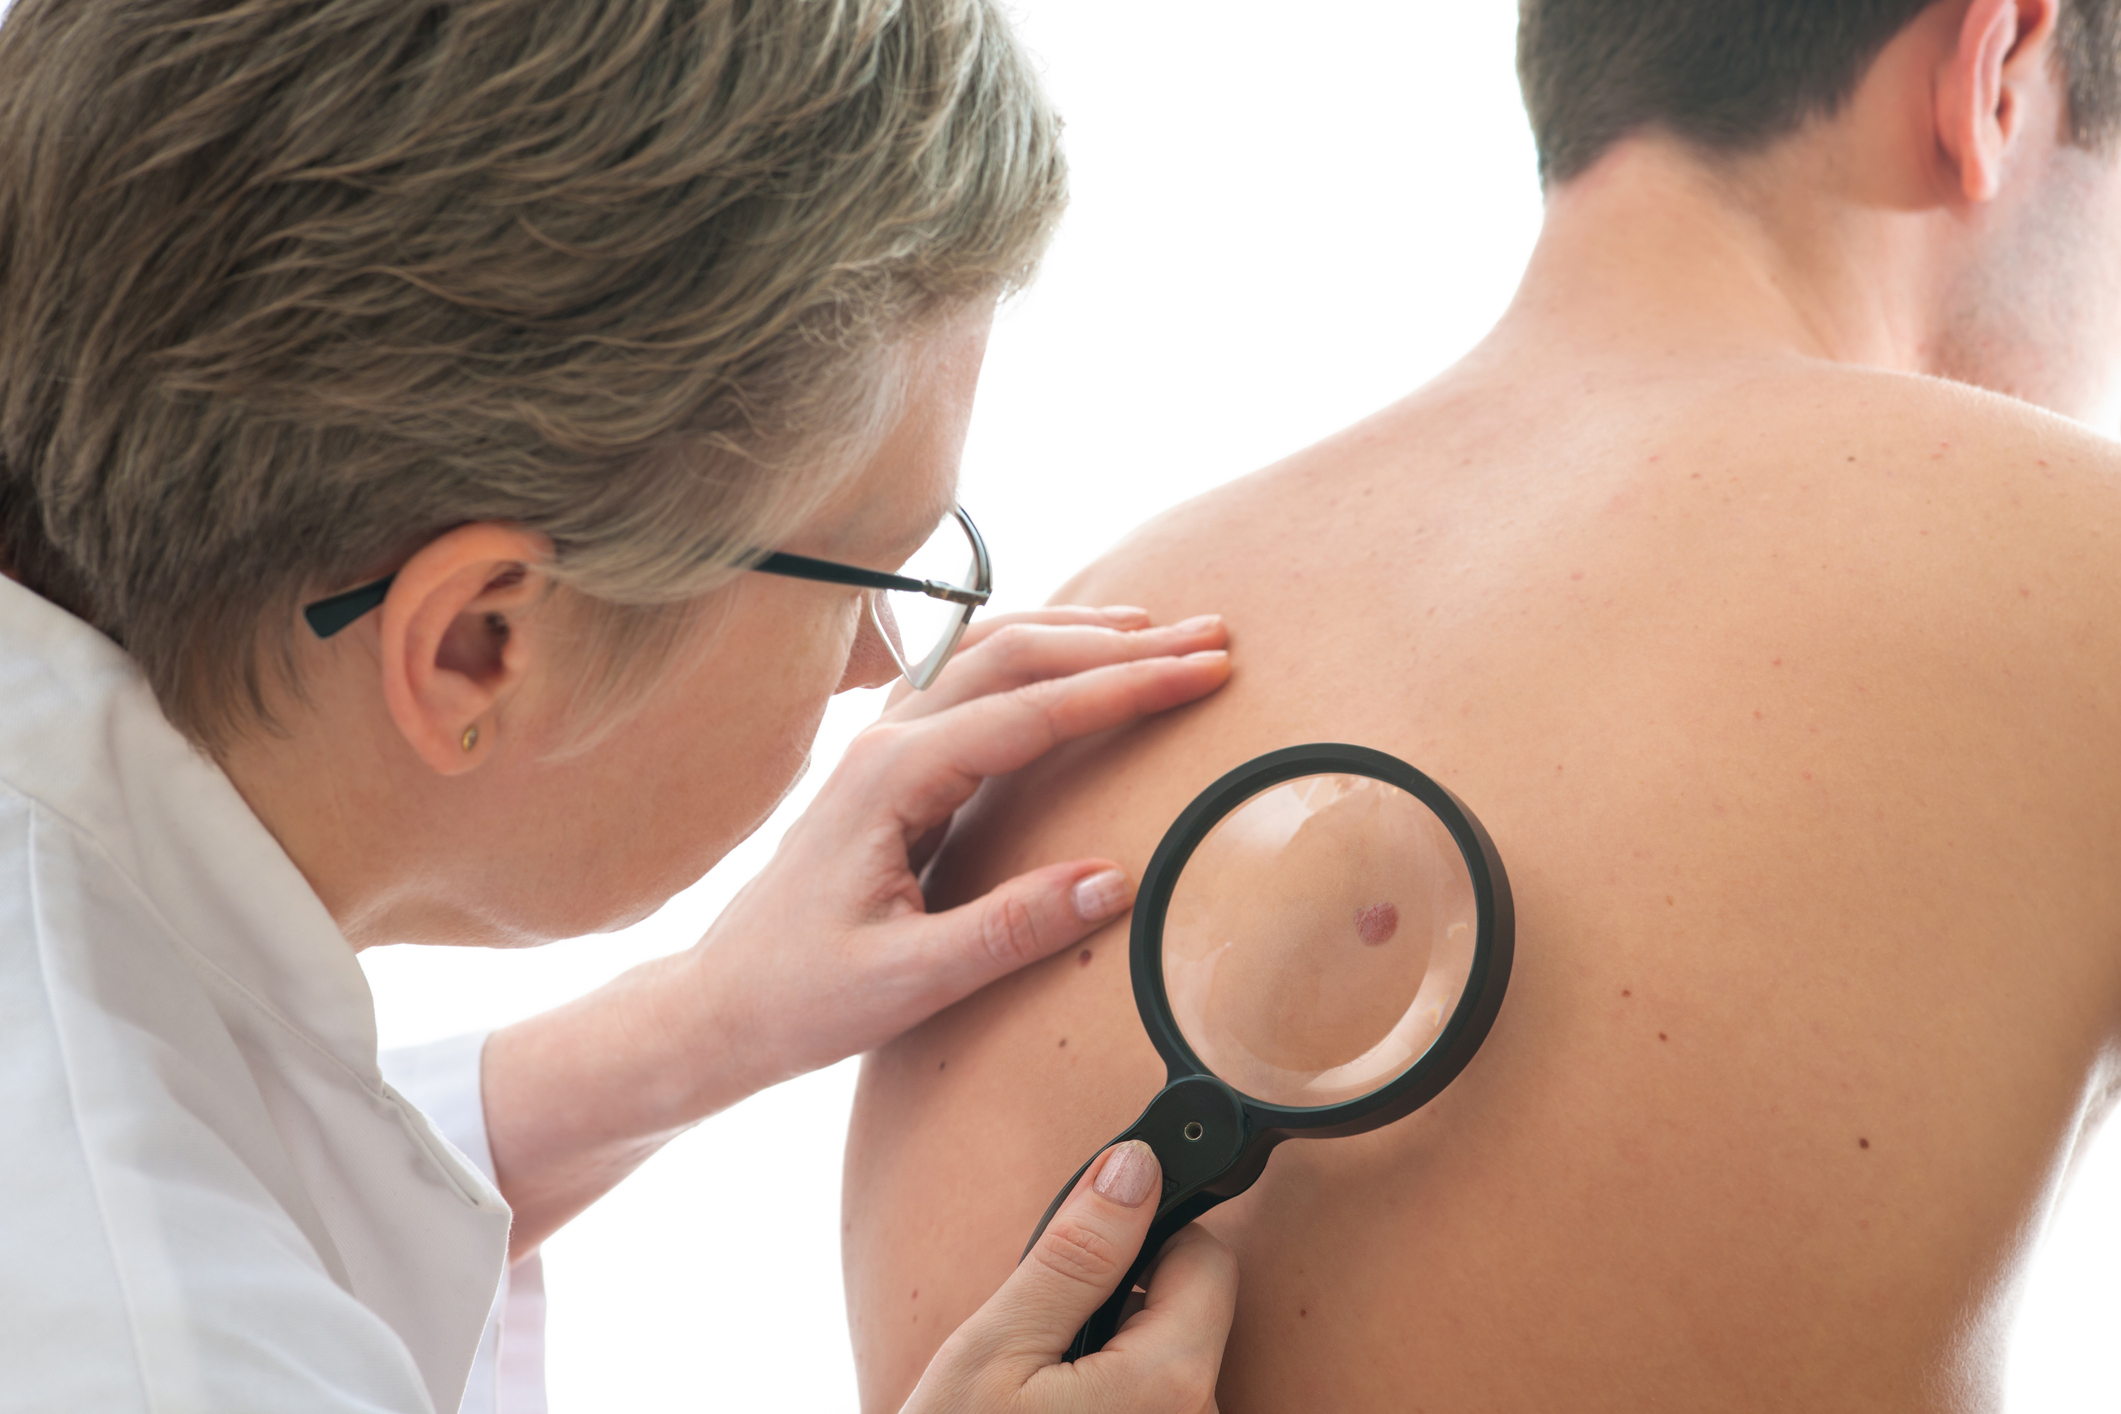 Dermatologist examining a mole on a person’s back